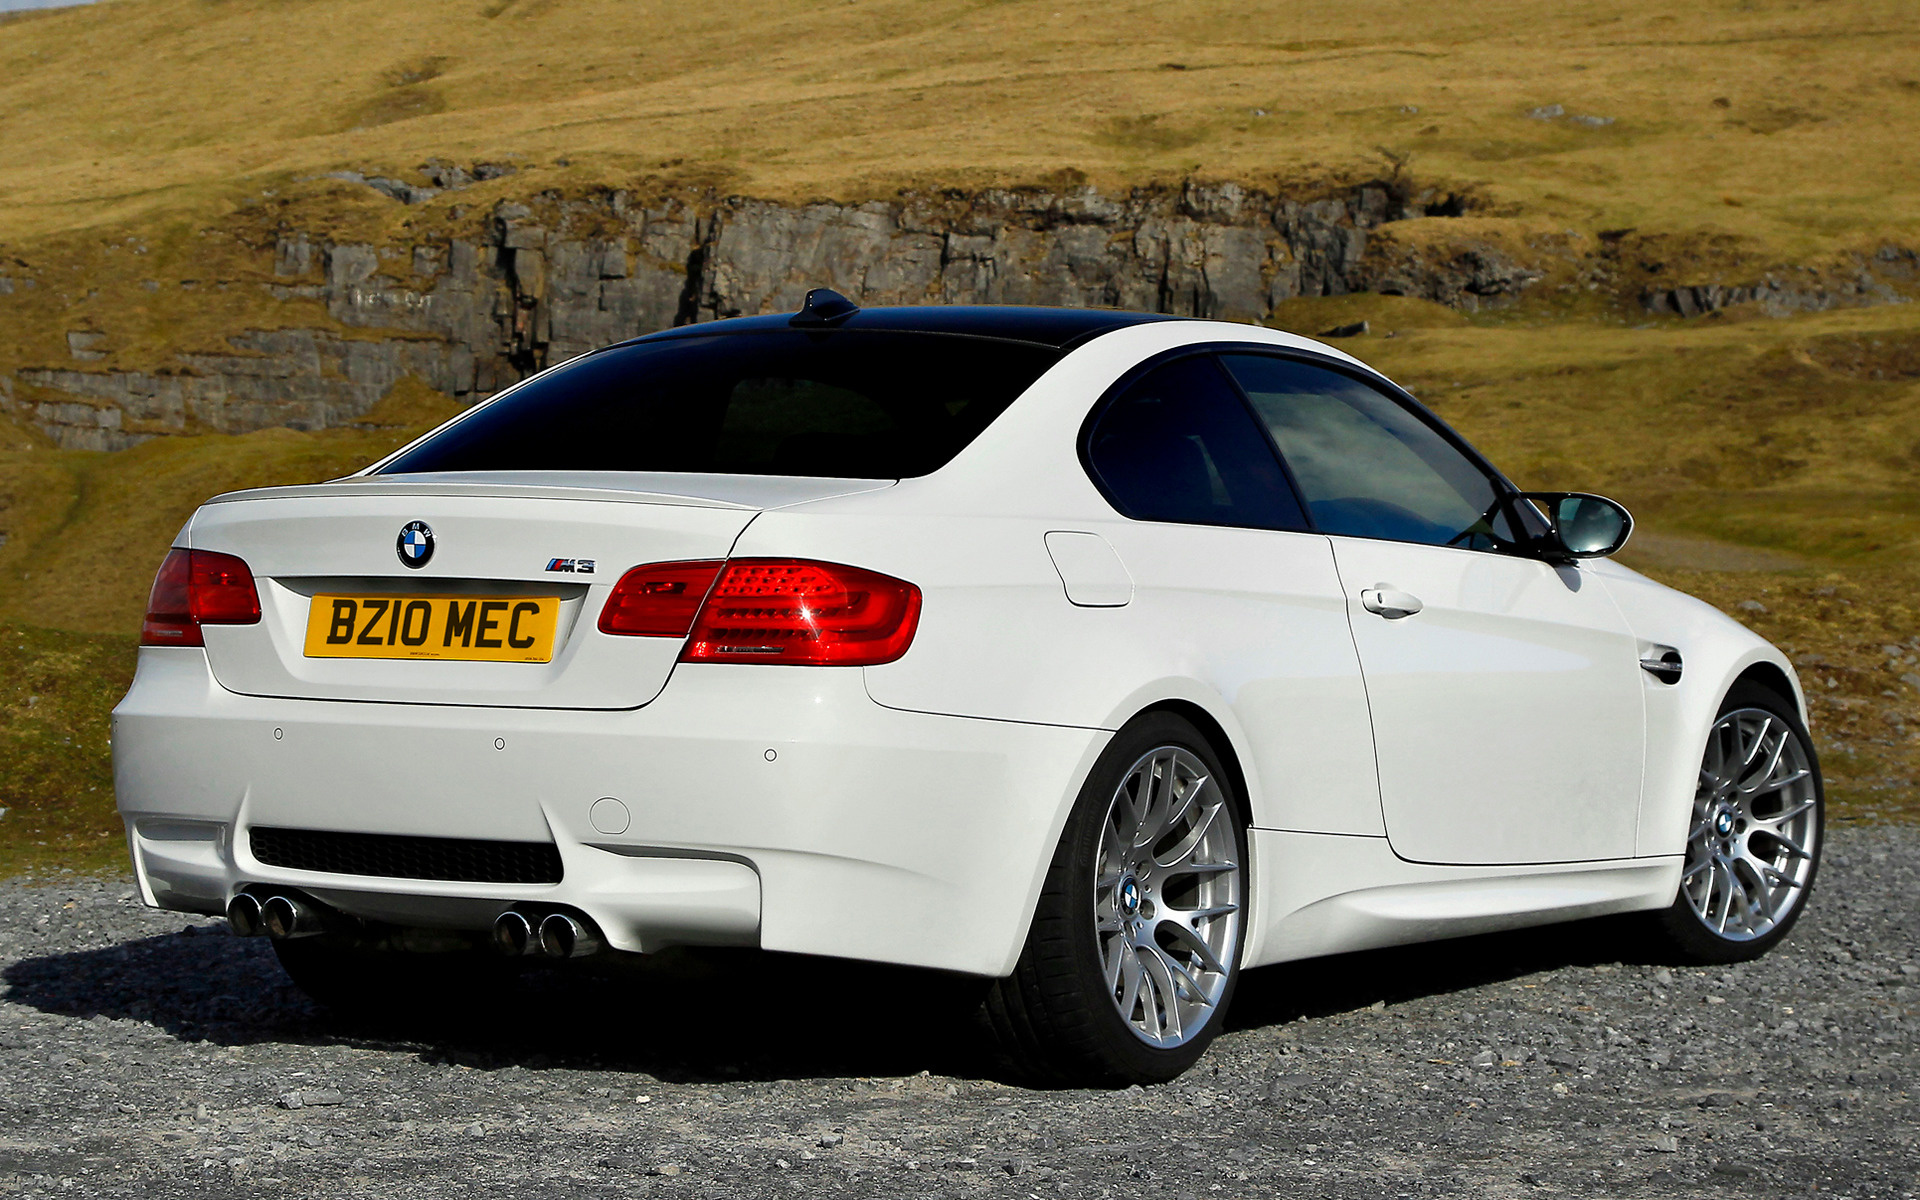 2010 BMW M3 Coupe Competition Package UK Wallpapers and HD Images 